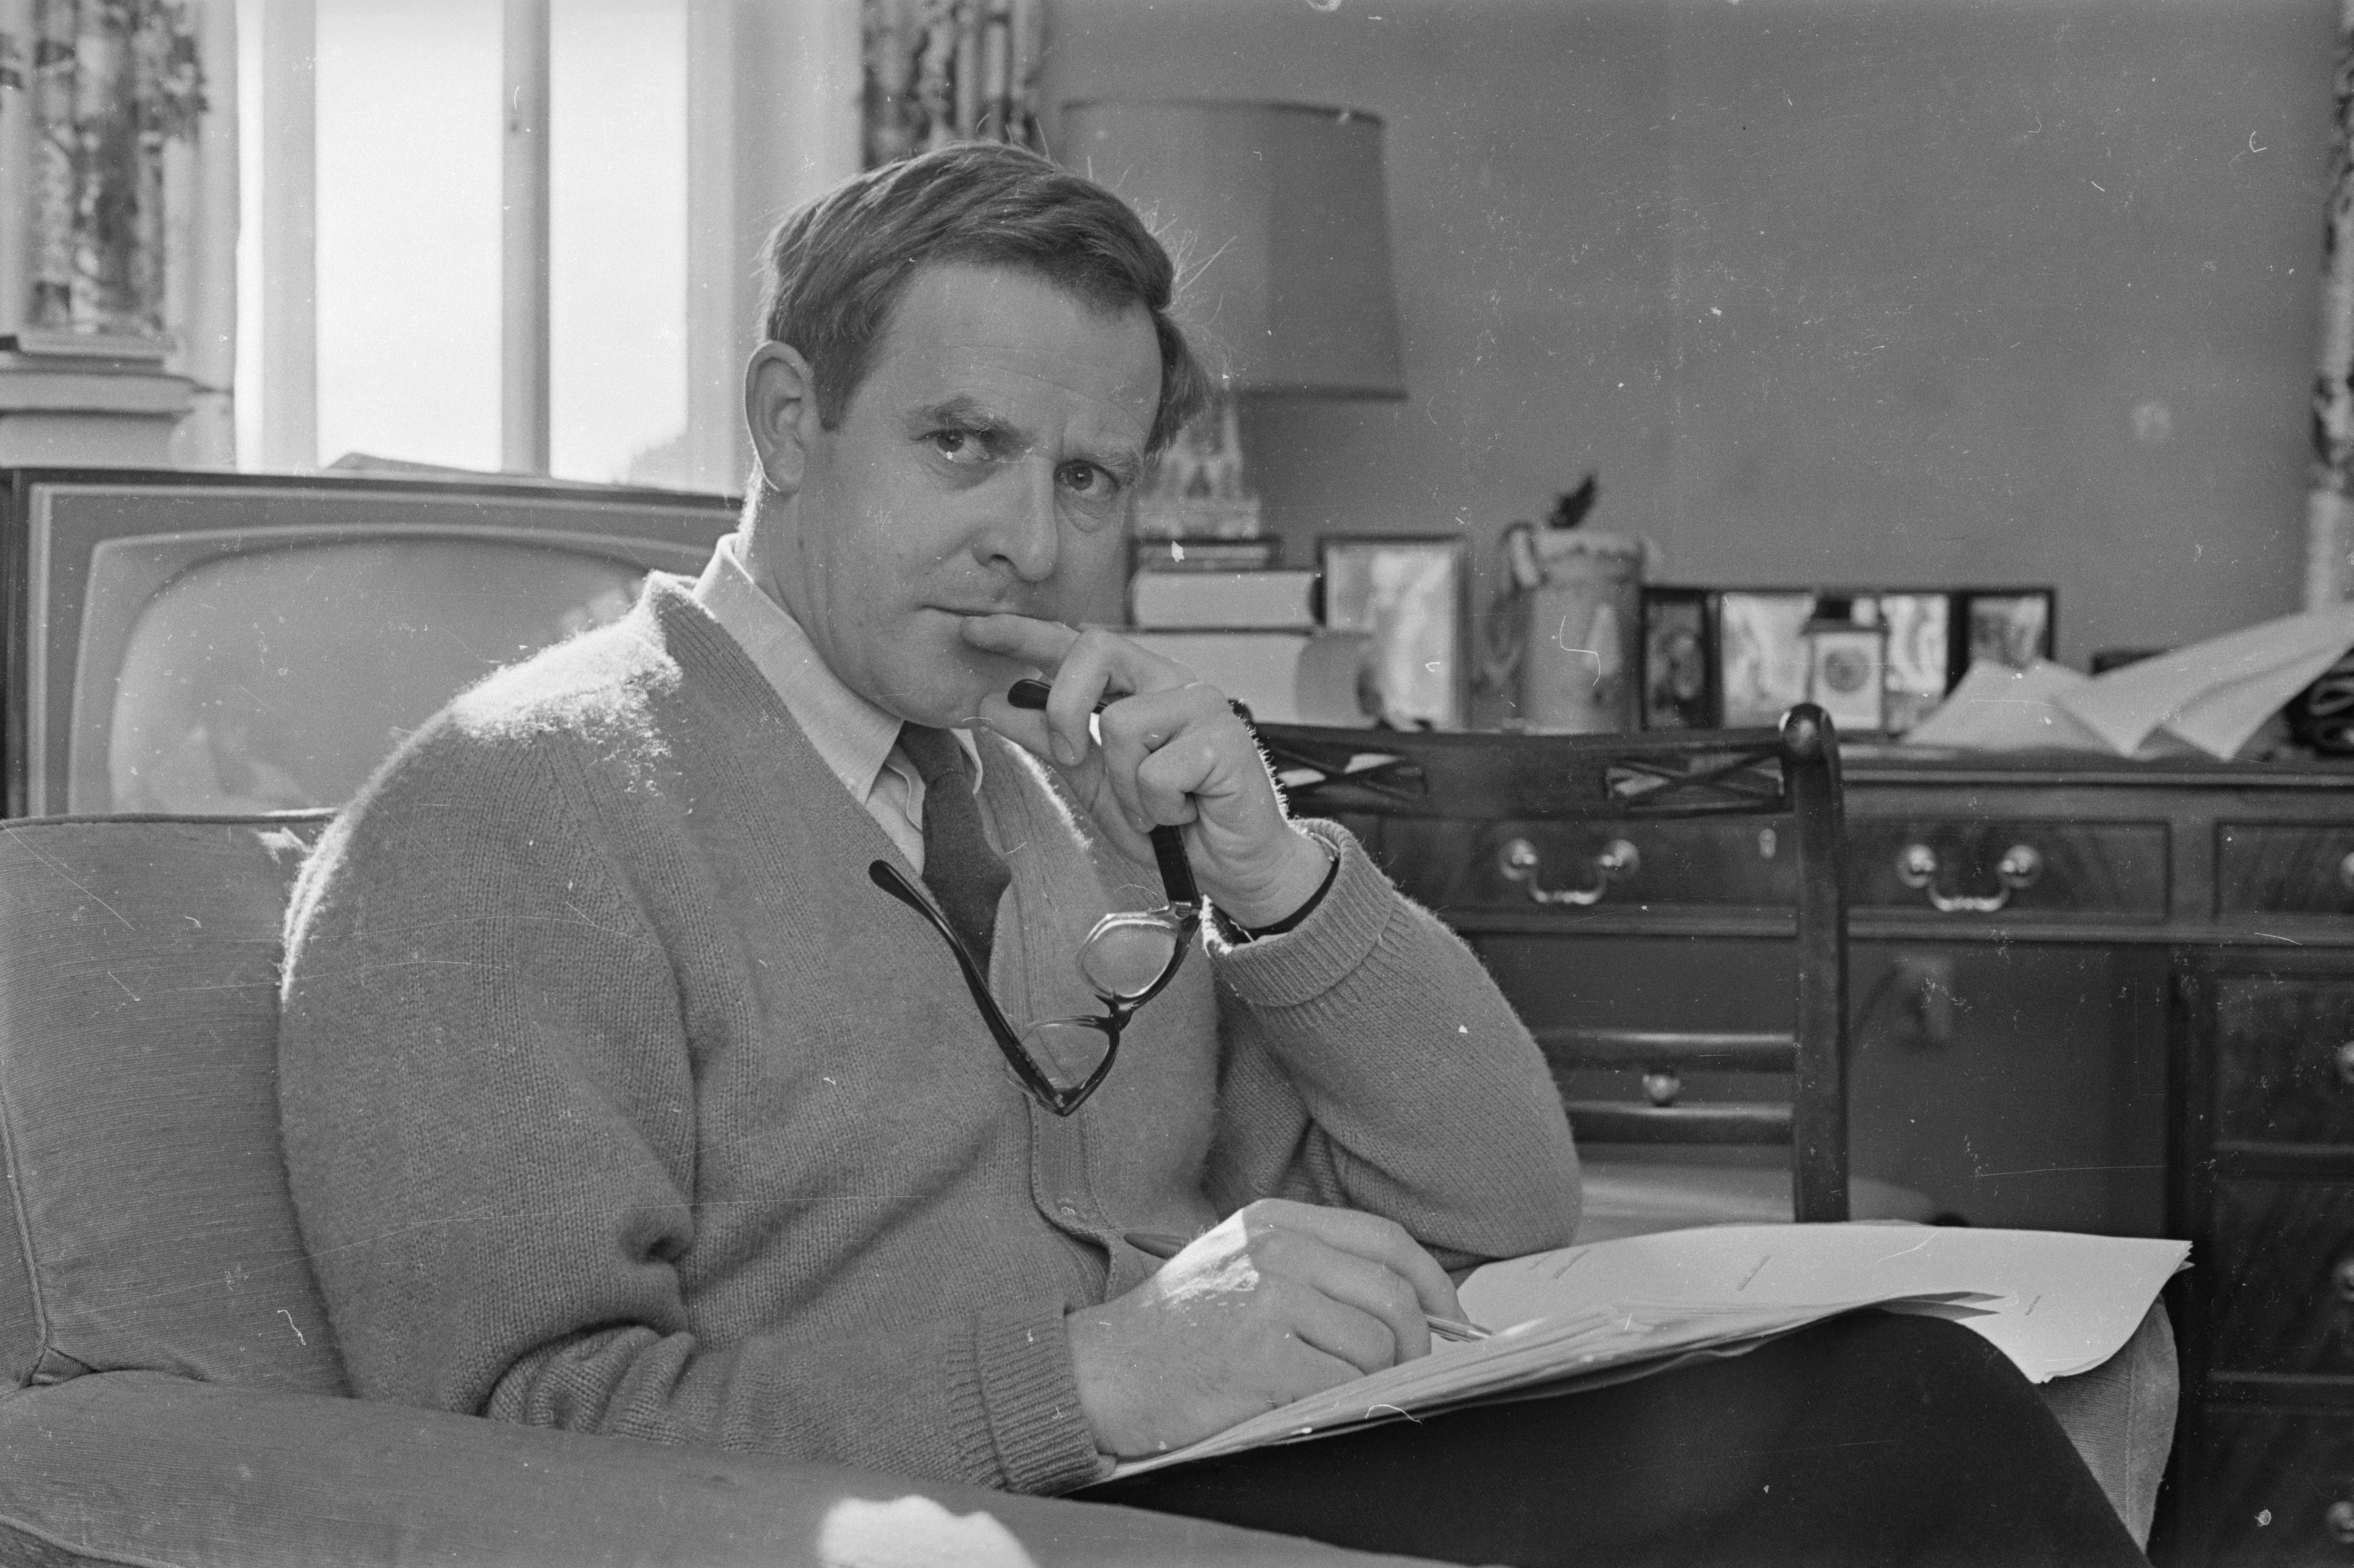 John le Carré in 1965, two decades before the publication of what was largely his autobiographical novel ‘A Perfect Spy’